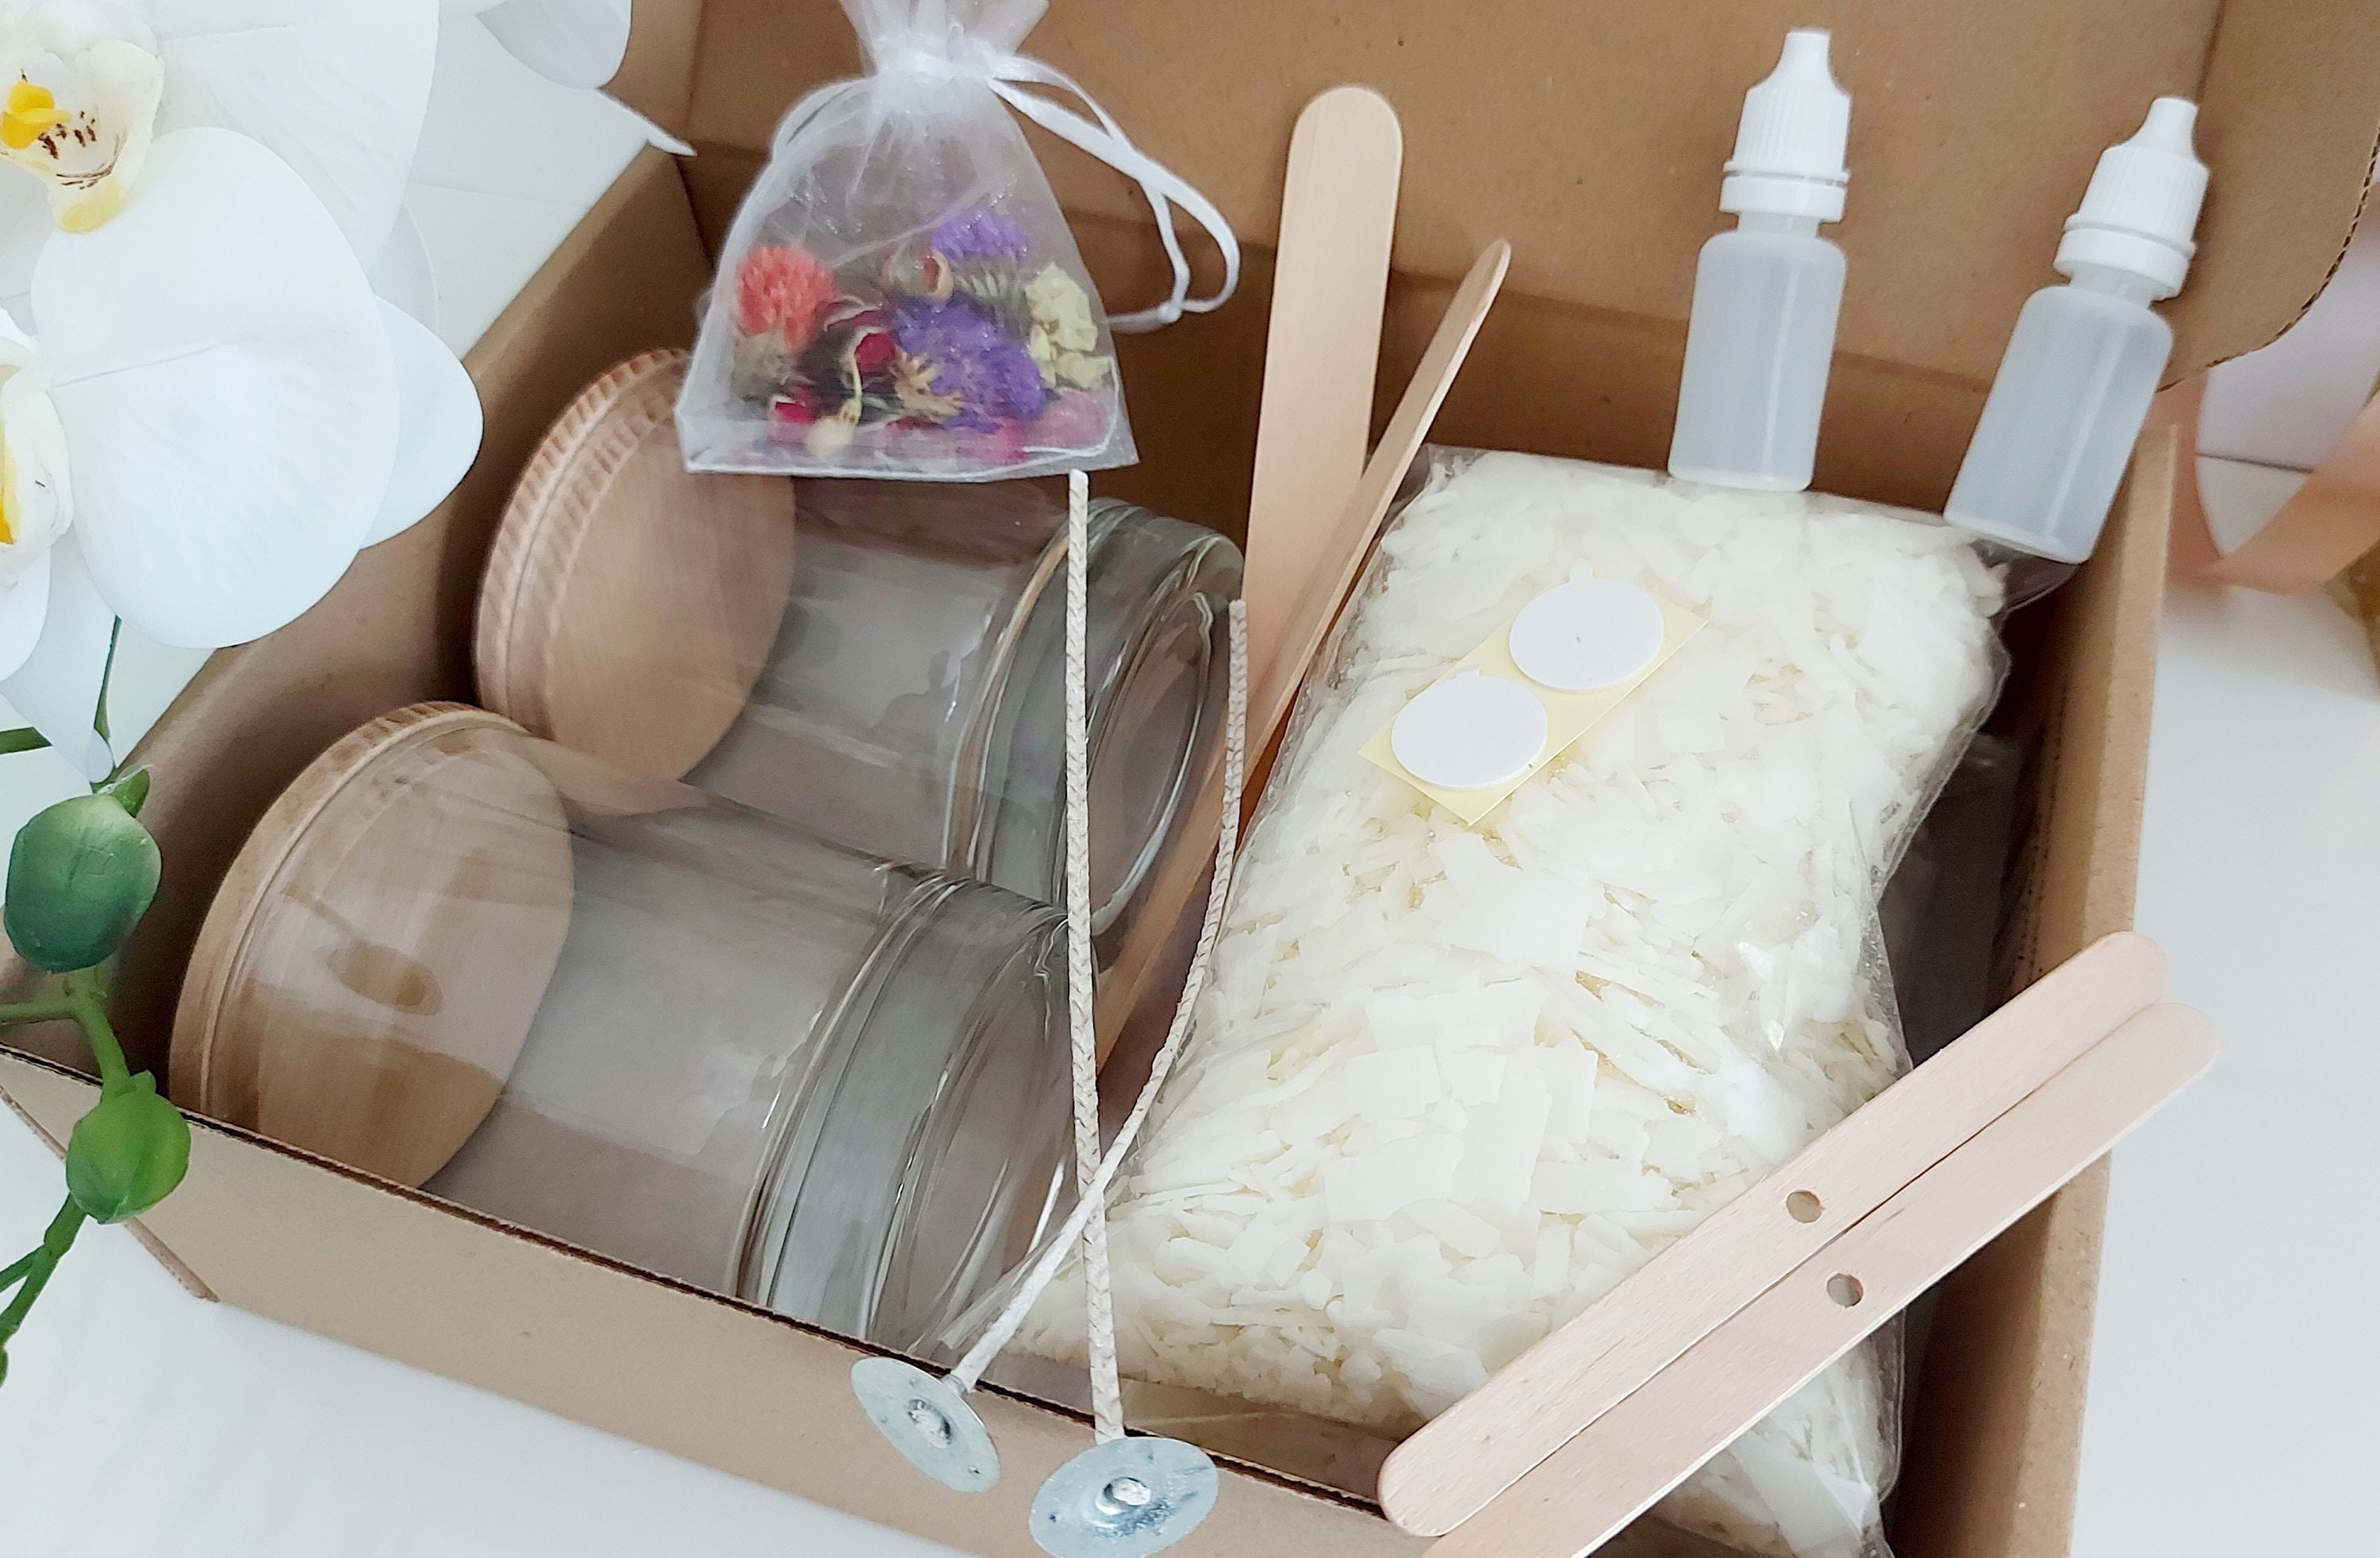 Candle Making Kit With Flowers for Beginners Adults Soy Wax, Craft Kit,  Home Decor, Make Your Own Candle, Candle Supplies, DIY Gift 